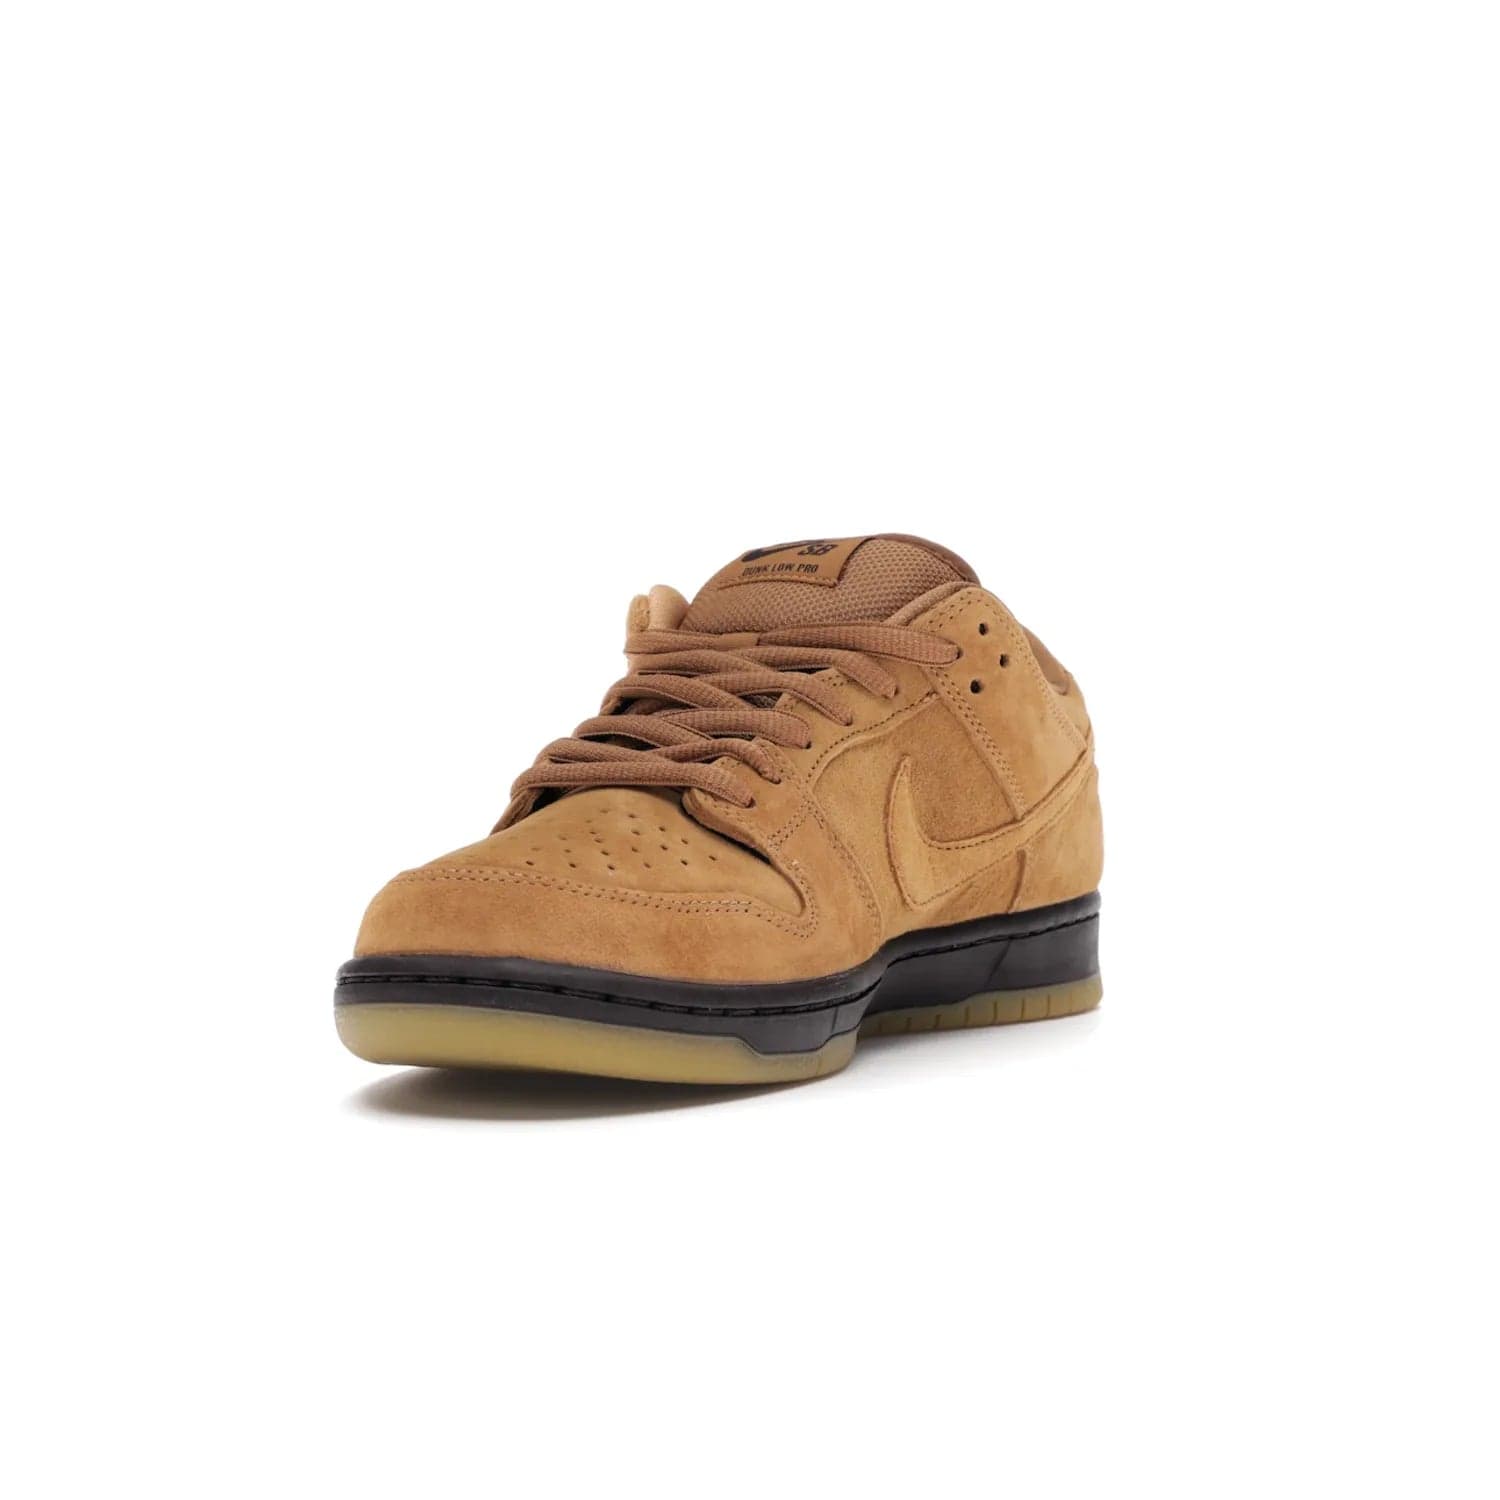 Nike SB Dunk Low Wheat (2021/2023) - Image 13 - Only at www.BallersClubKickz.com - The Nike SB Dunk Low Wheat (2021/2023)has a sleek silhouette and wheat suede upper. Tan tones for lining, mesh tongues, and laces. Iconic color palette midsole, perforated boxing toe. Brown branding on tongue and heel. Gum rubber outsole with partitioned pattern for traction. Eschewed in Feb 2021 for $110.